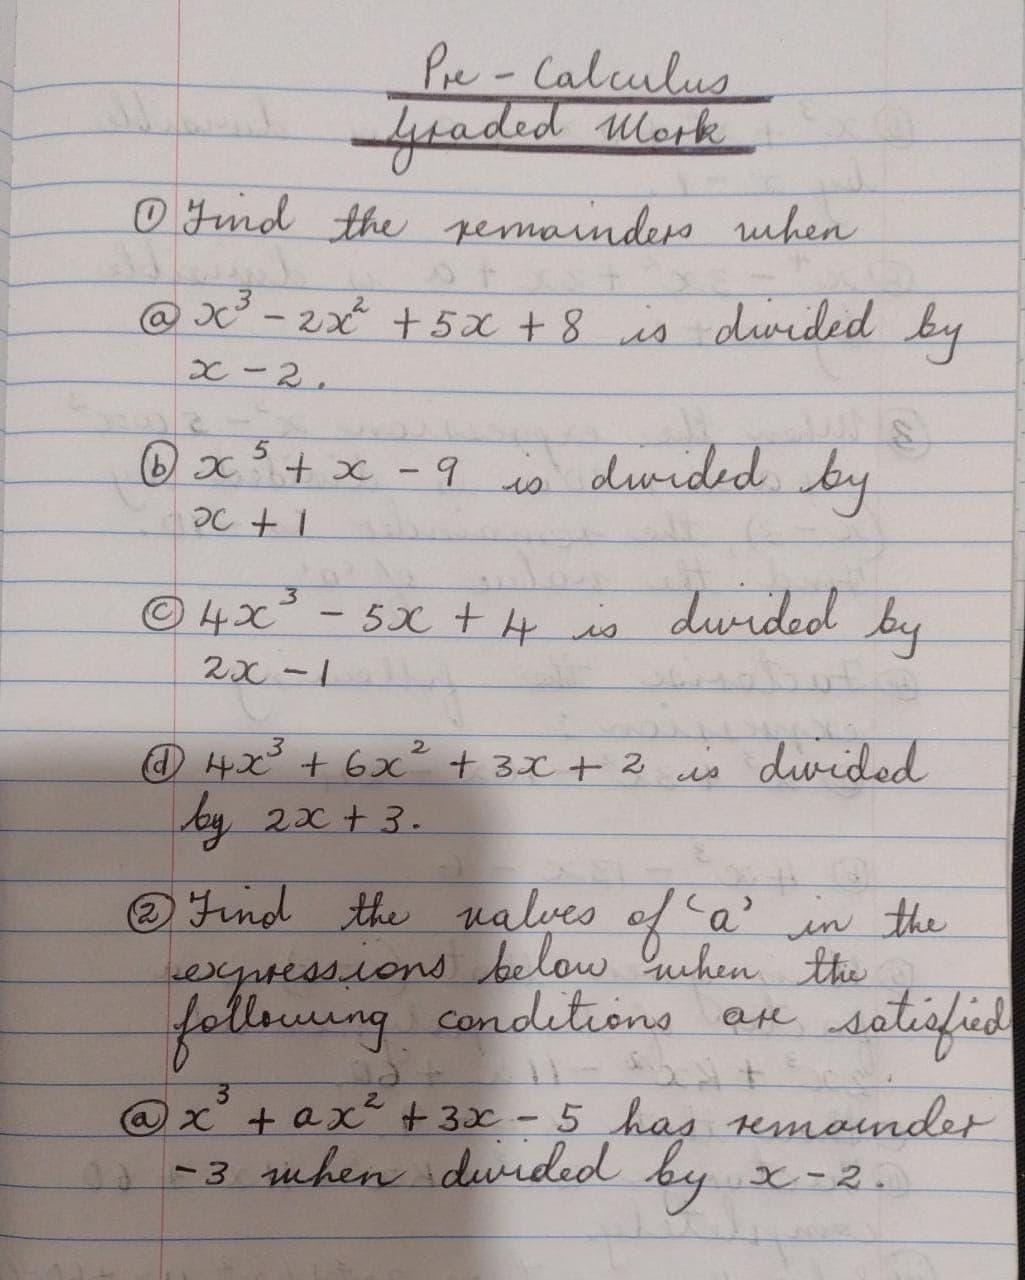 Pre-Calculus
feaded Mork
O Jnd the permainders when
@ X² – 2xX + 5x +8 is divided by
x-2,
is duided. by
5.
(b) x+x -9
|
duided by
©4X
2x -1
- 5x + 4 is
O 4x + 6x² + 3x + 2 is dvided
by 2x + 3.
® Find the nalves of a' in the
exgressions below Guhen the
following condetrons an
sotisfid
are
3.
@ x + ax + 3x - 5 has emounder
-3 uhen durded by
と-2。
